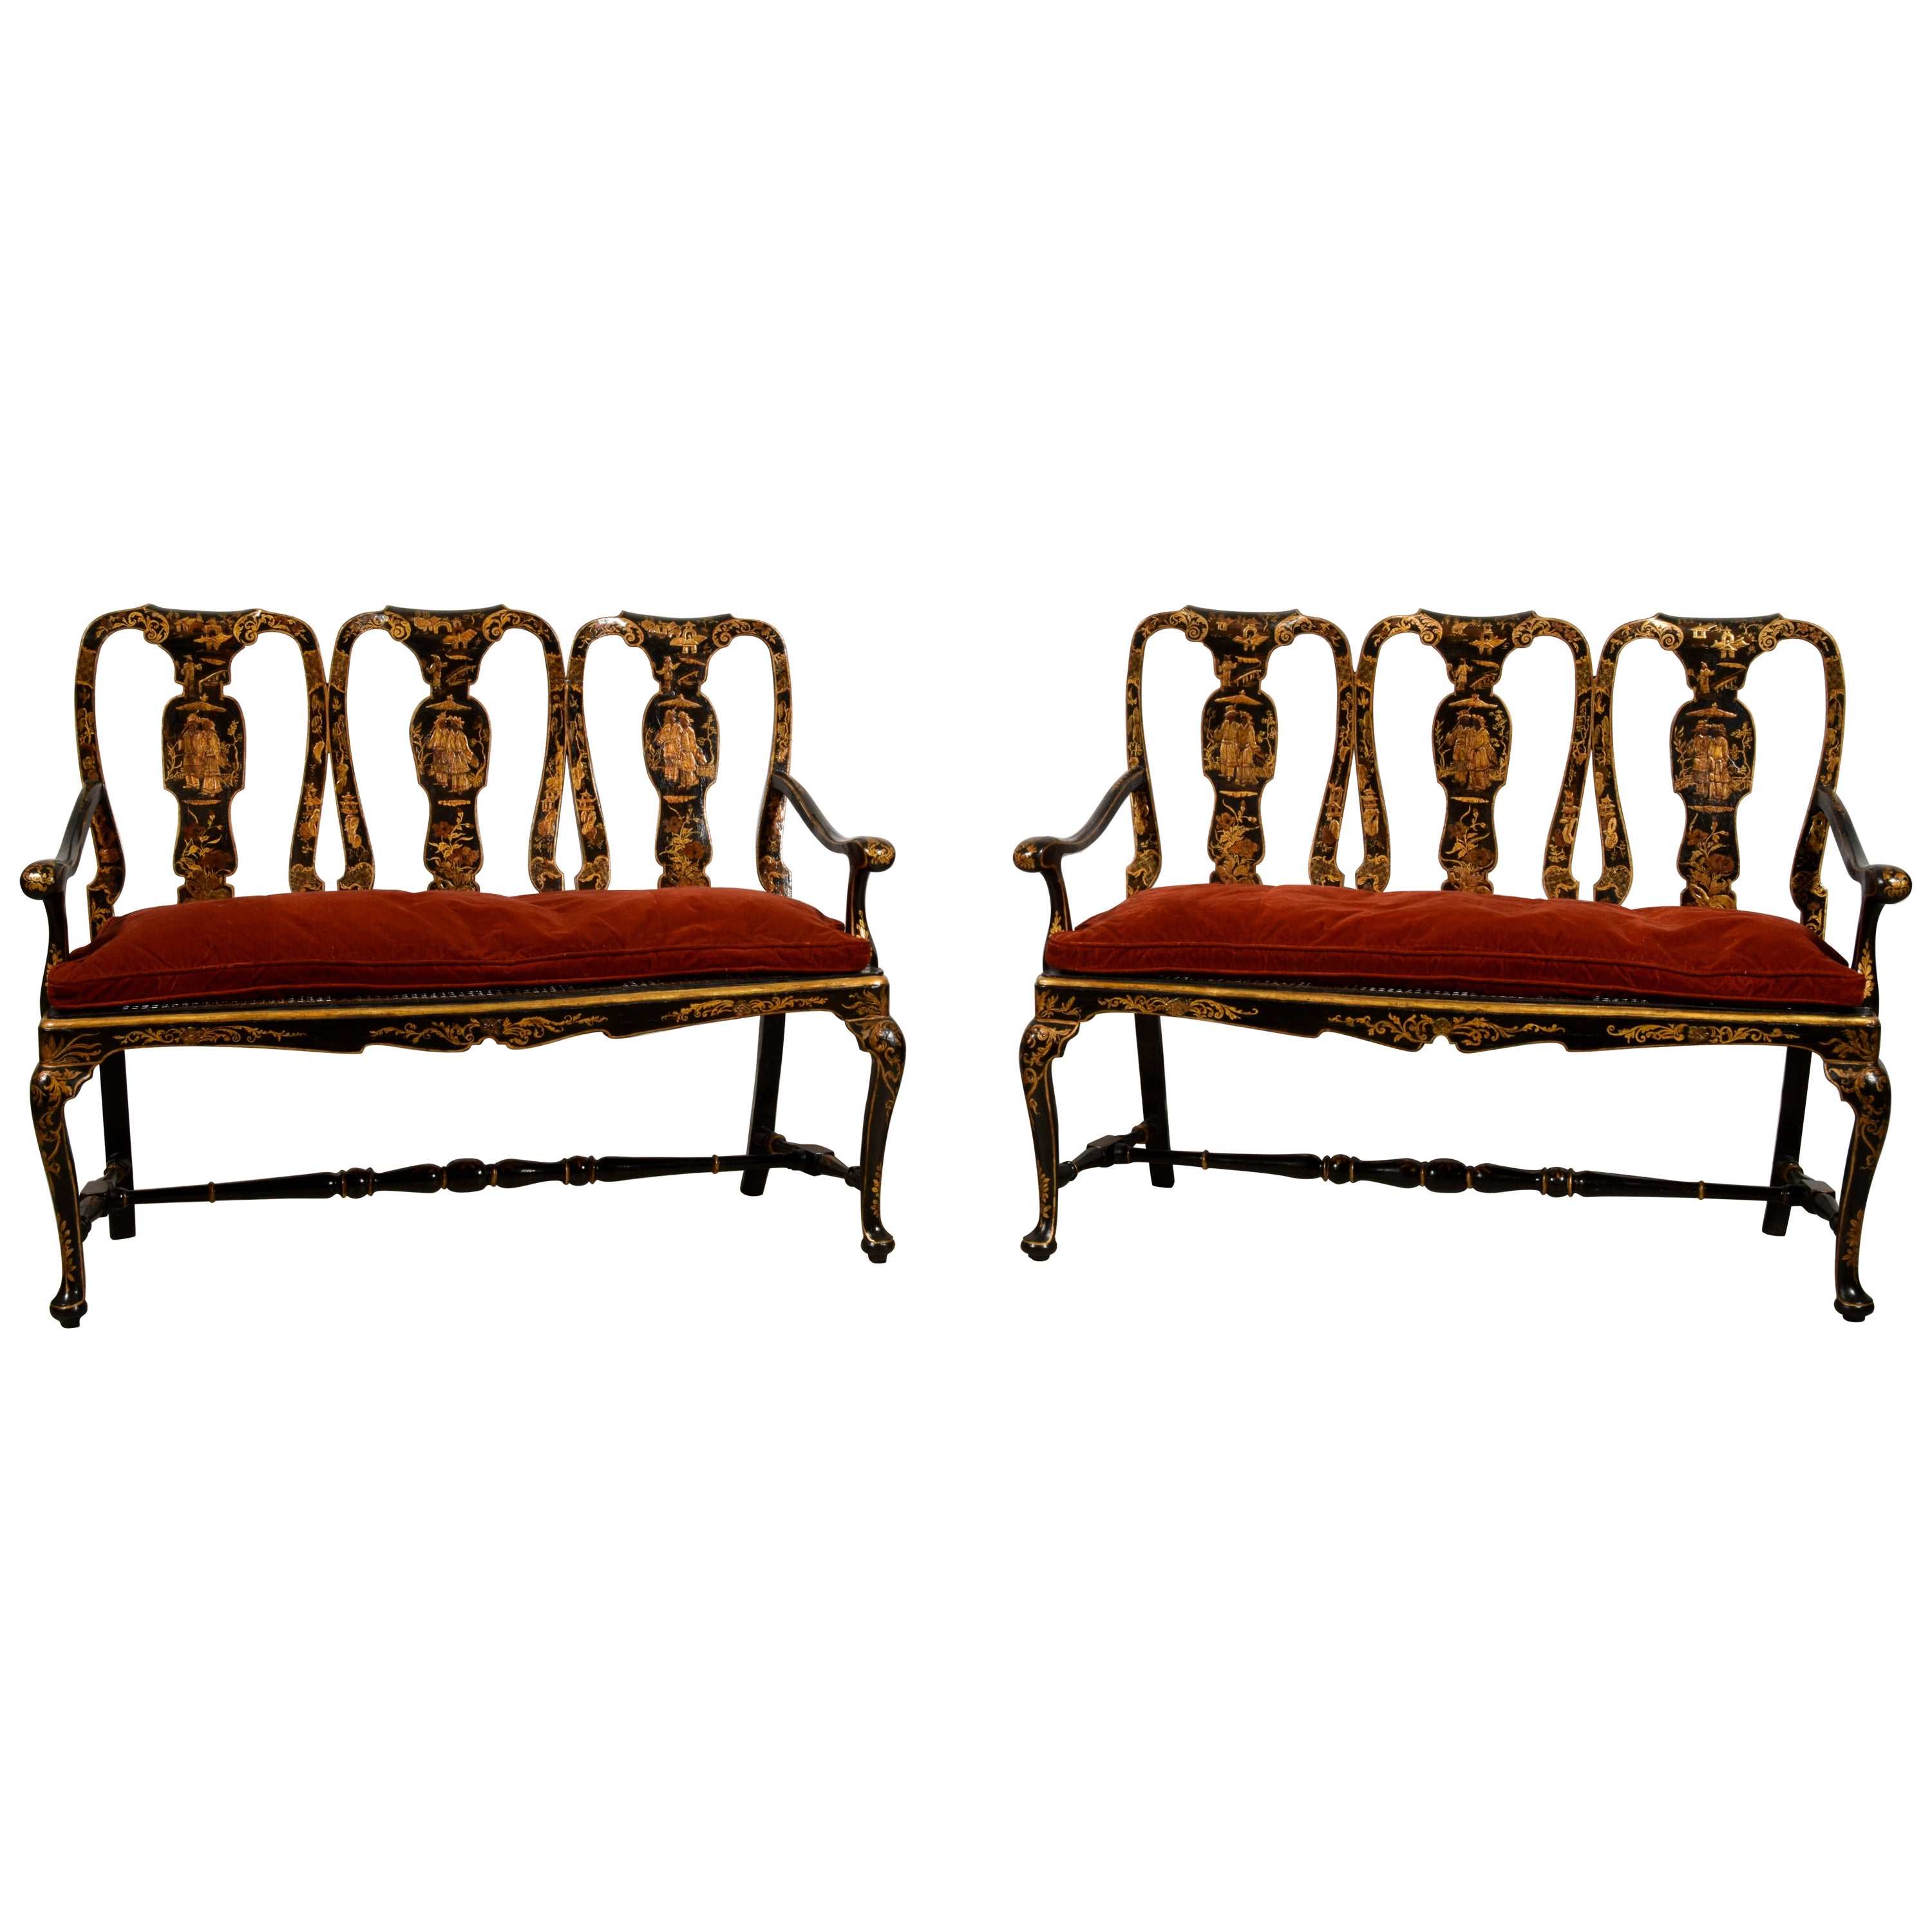 18th Century, Pair of Italian Lacquered Chinoiserie Wood Sofas